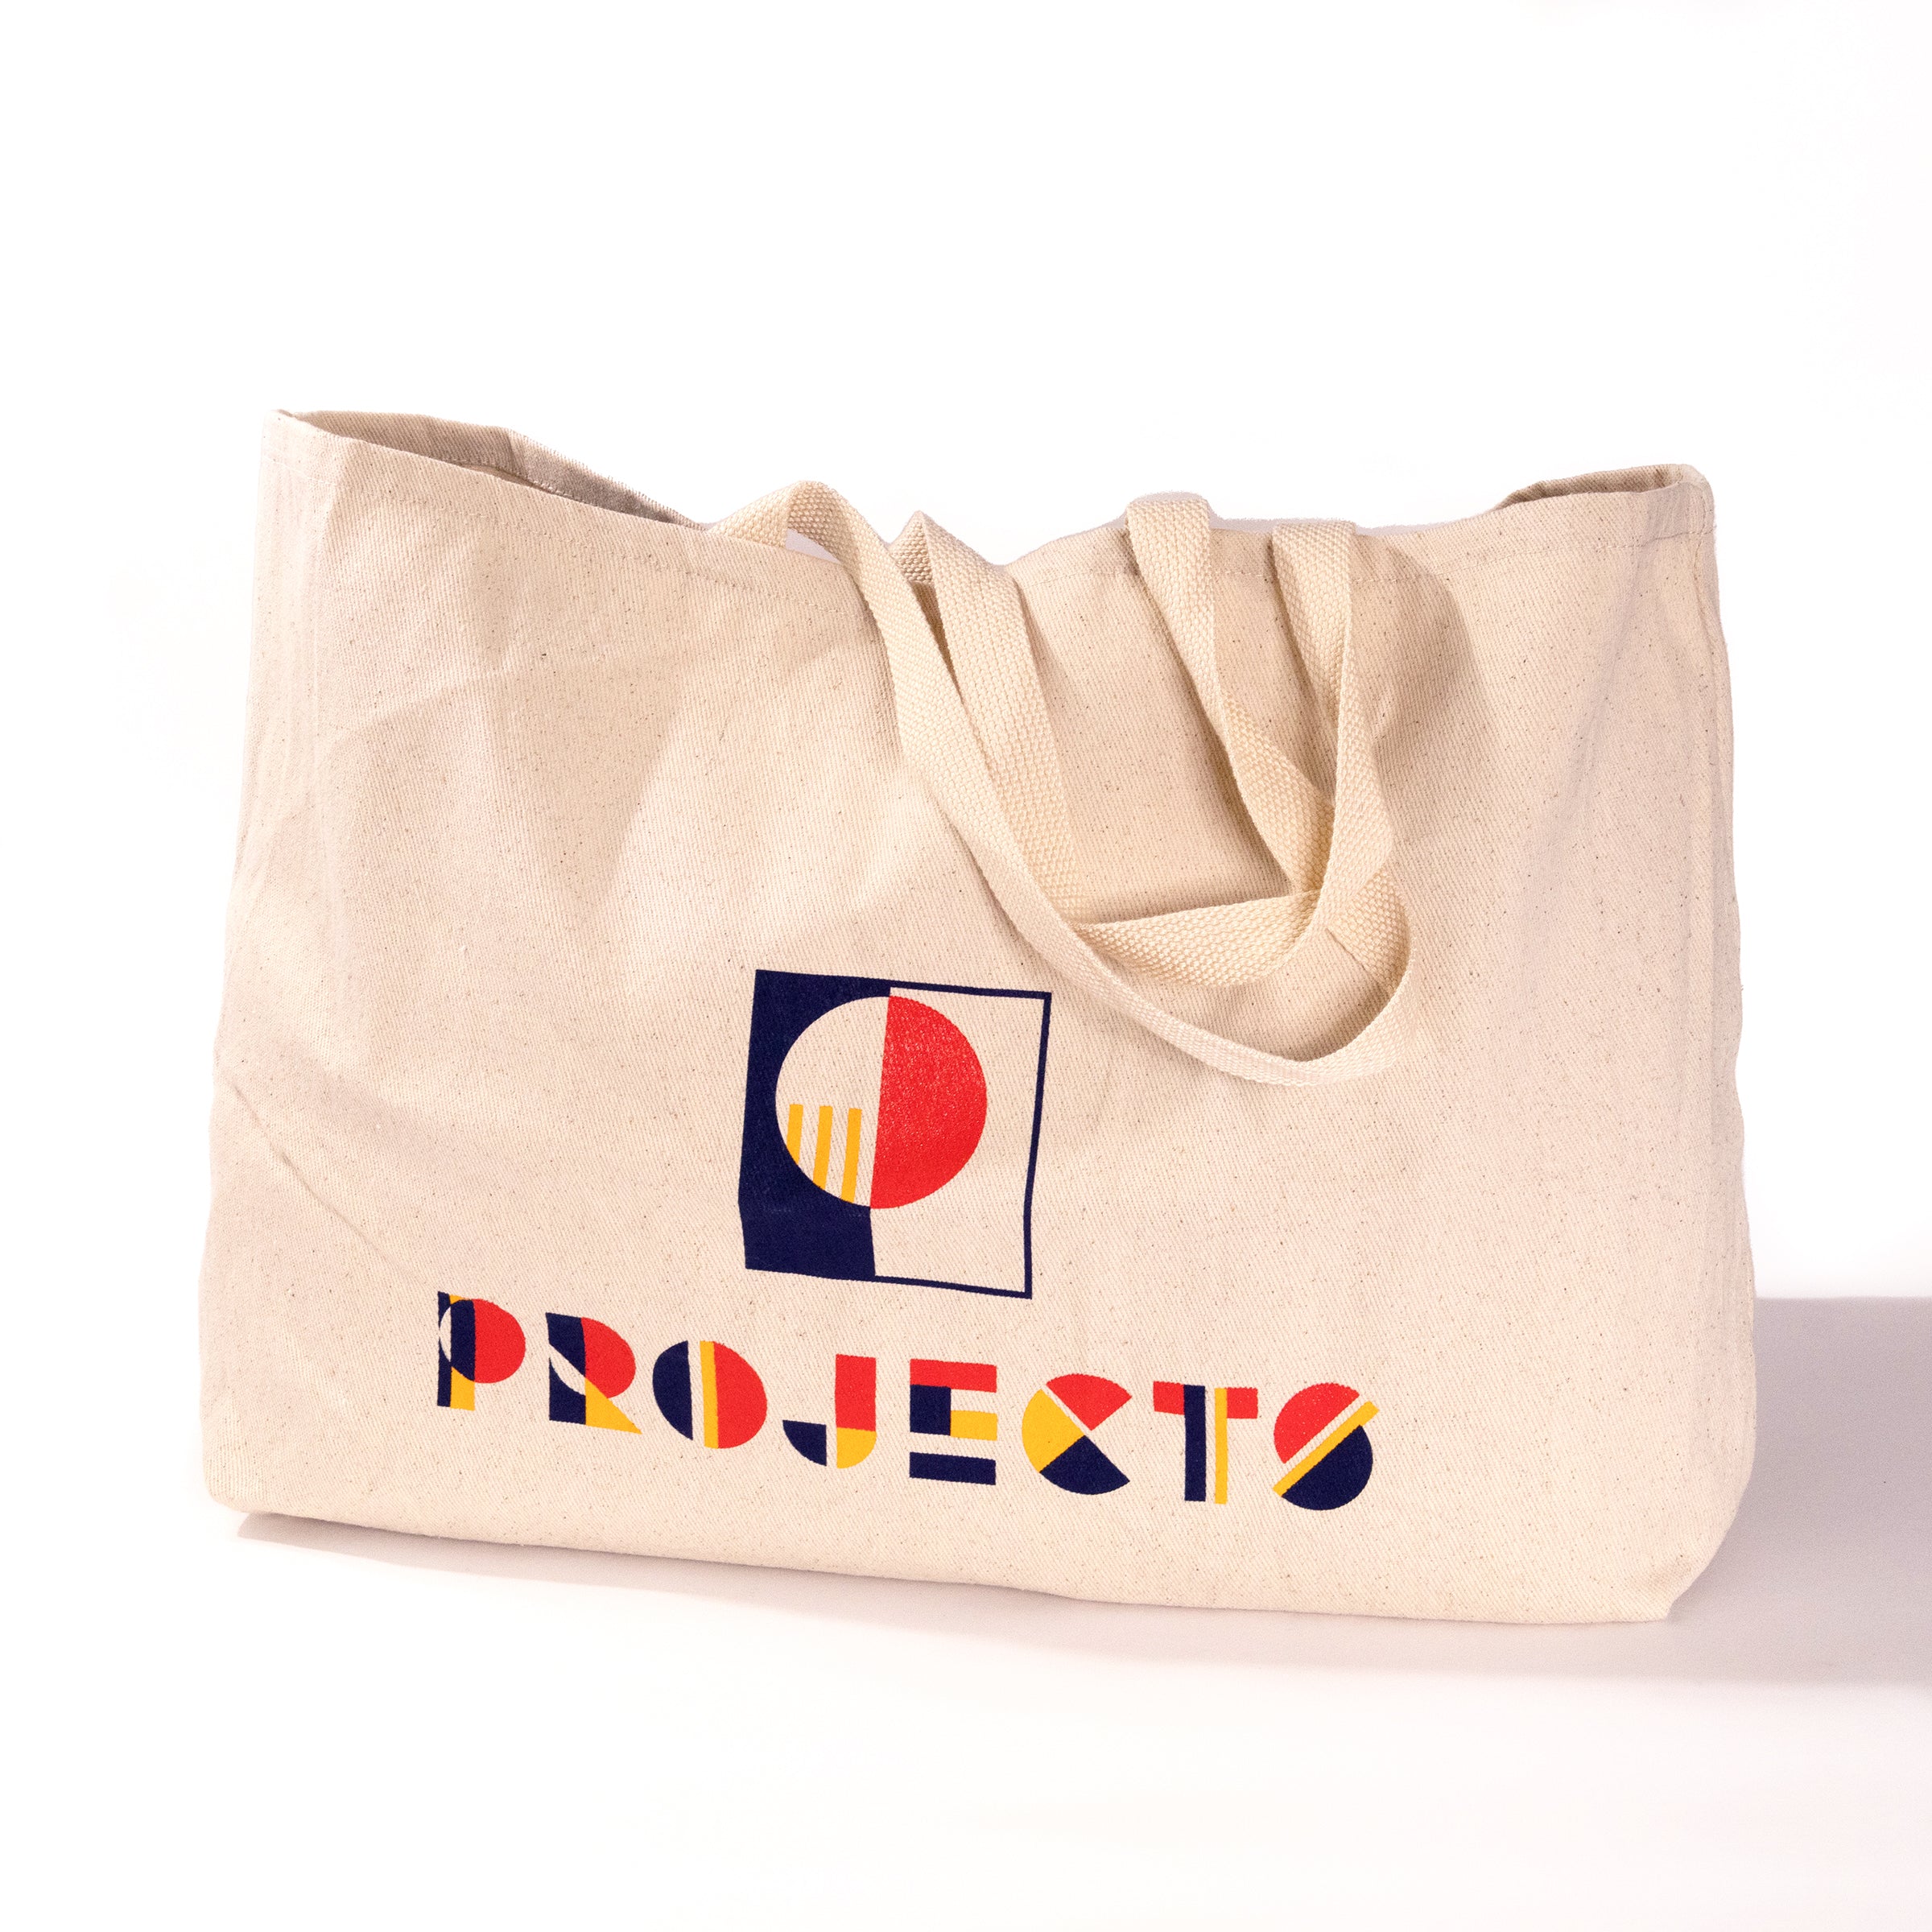 Tote Bag - Projects Watches